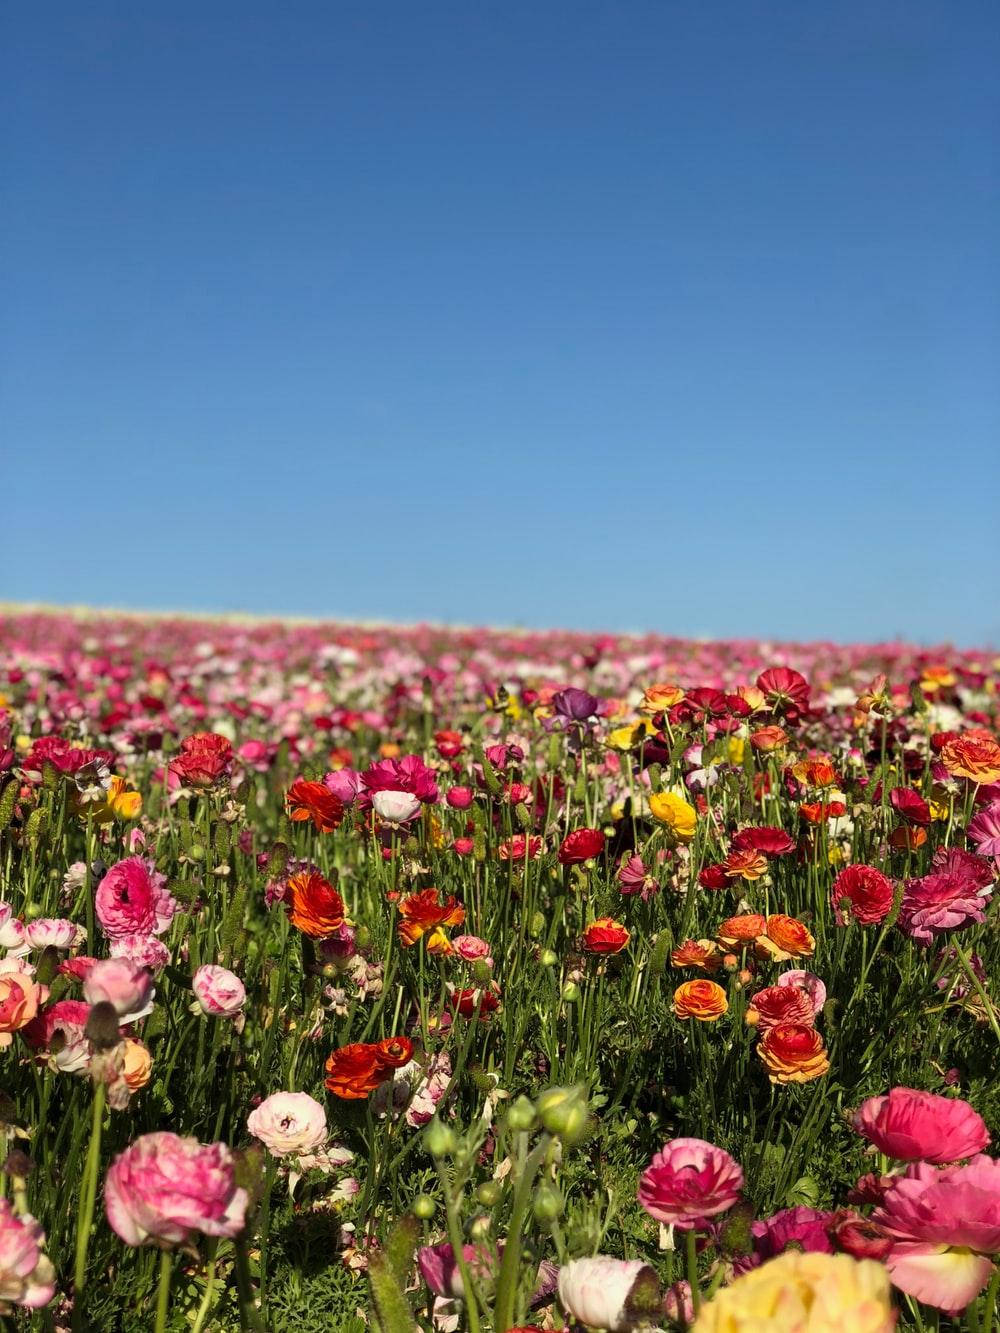 Assorted Colorful Flower Field Wallpaper